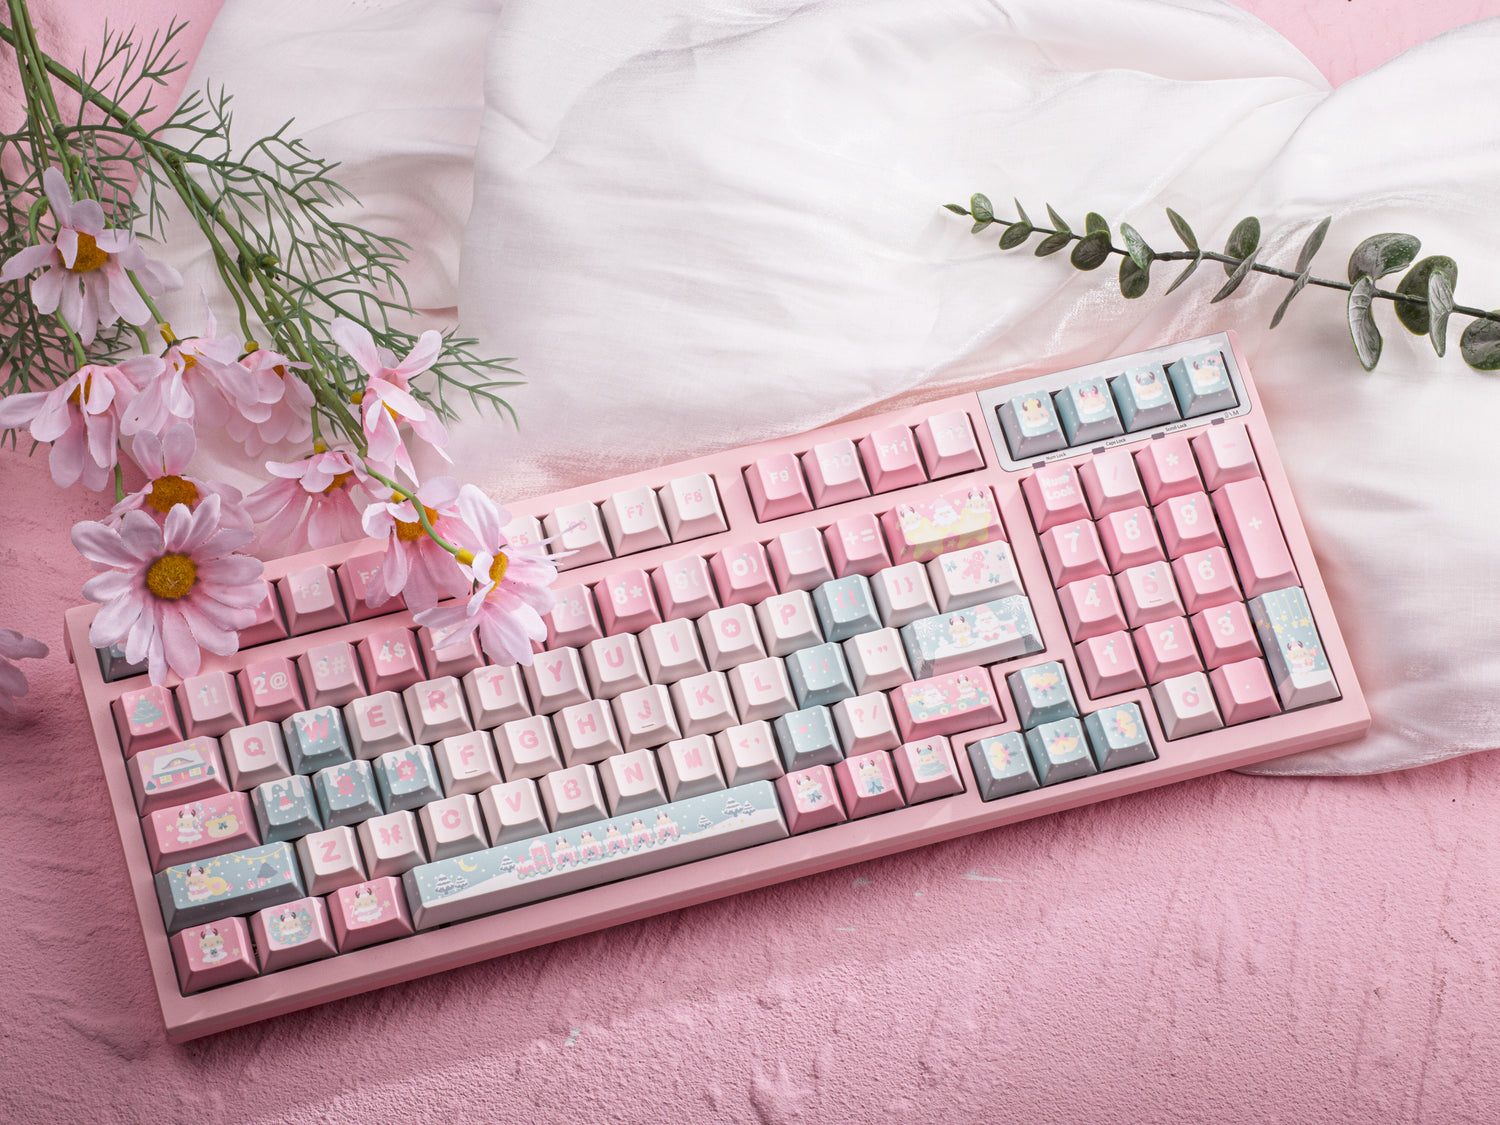 Keycaps and keyboard: the perfect combination of cool appearance and excellent typing experience